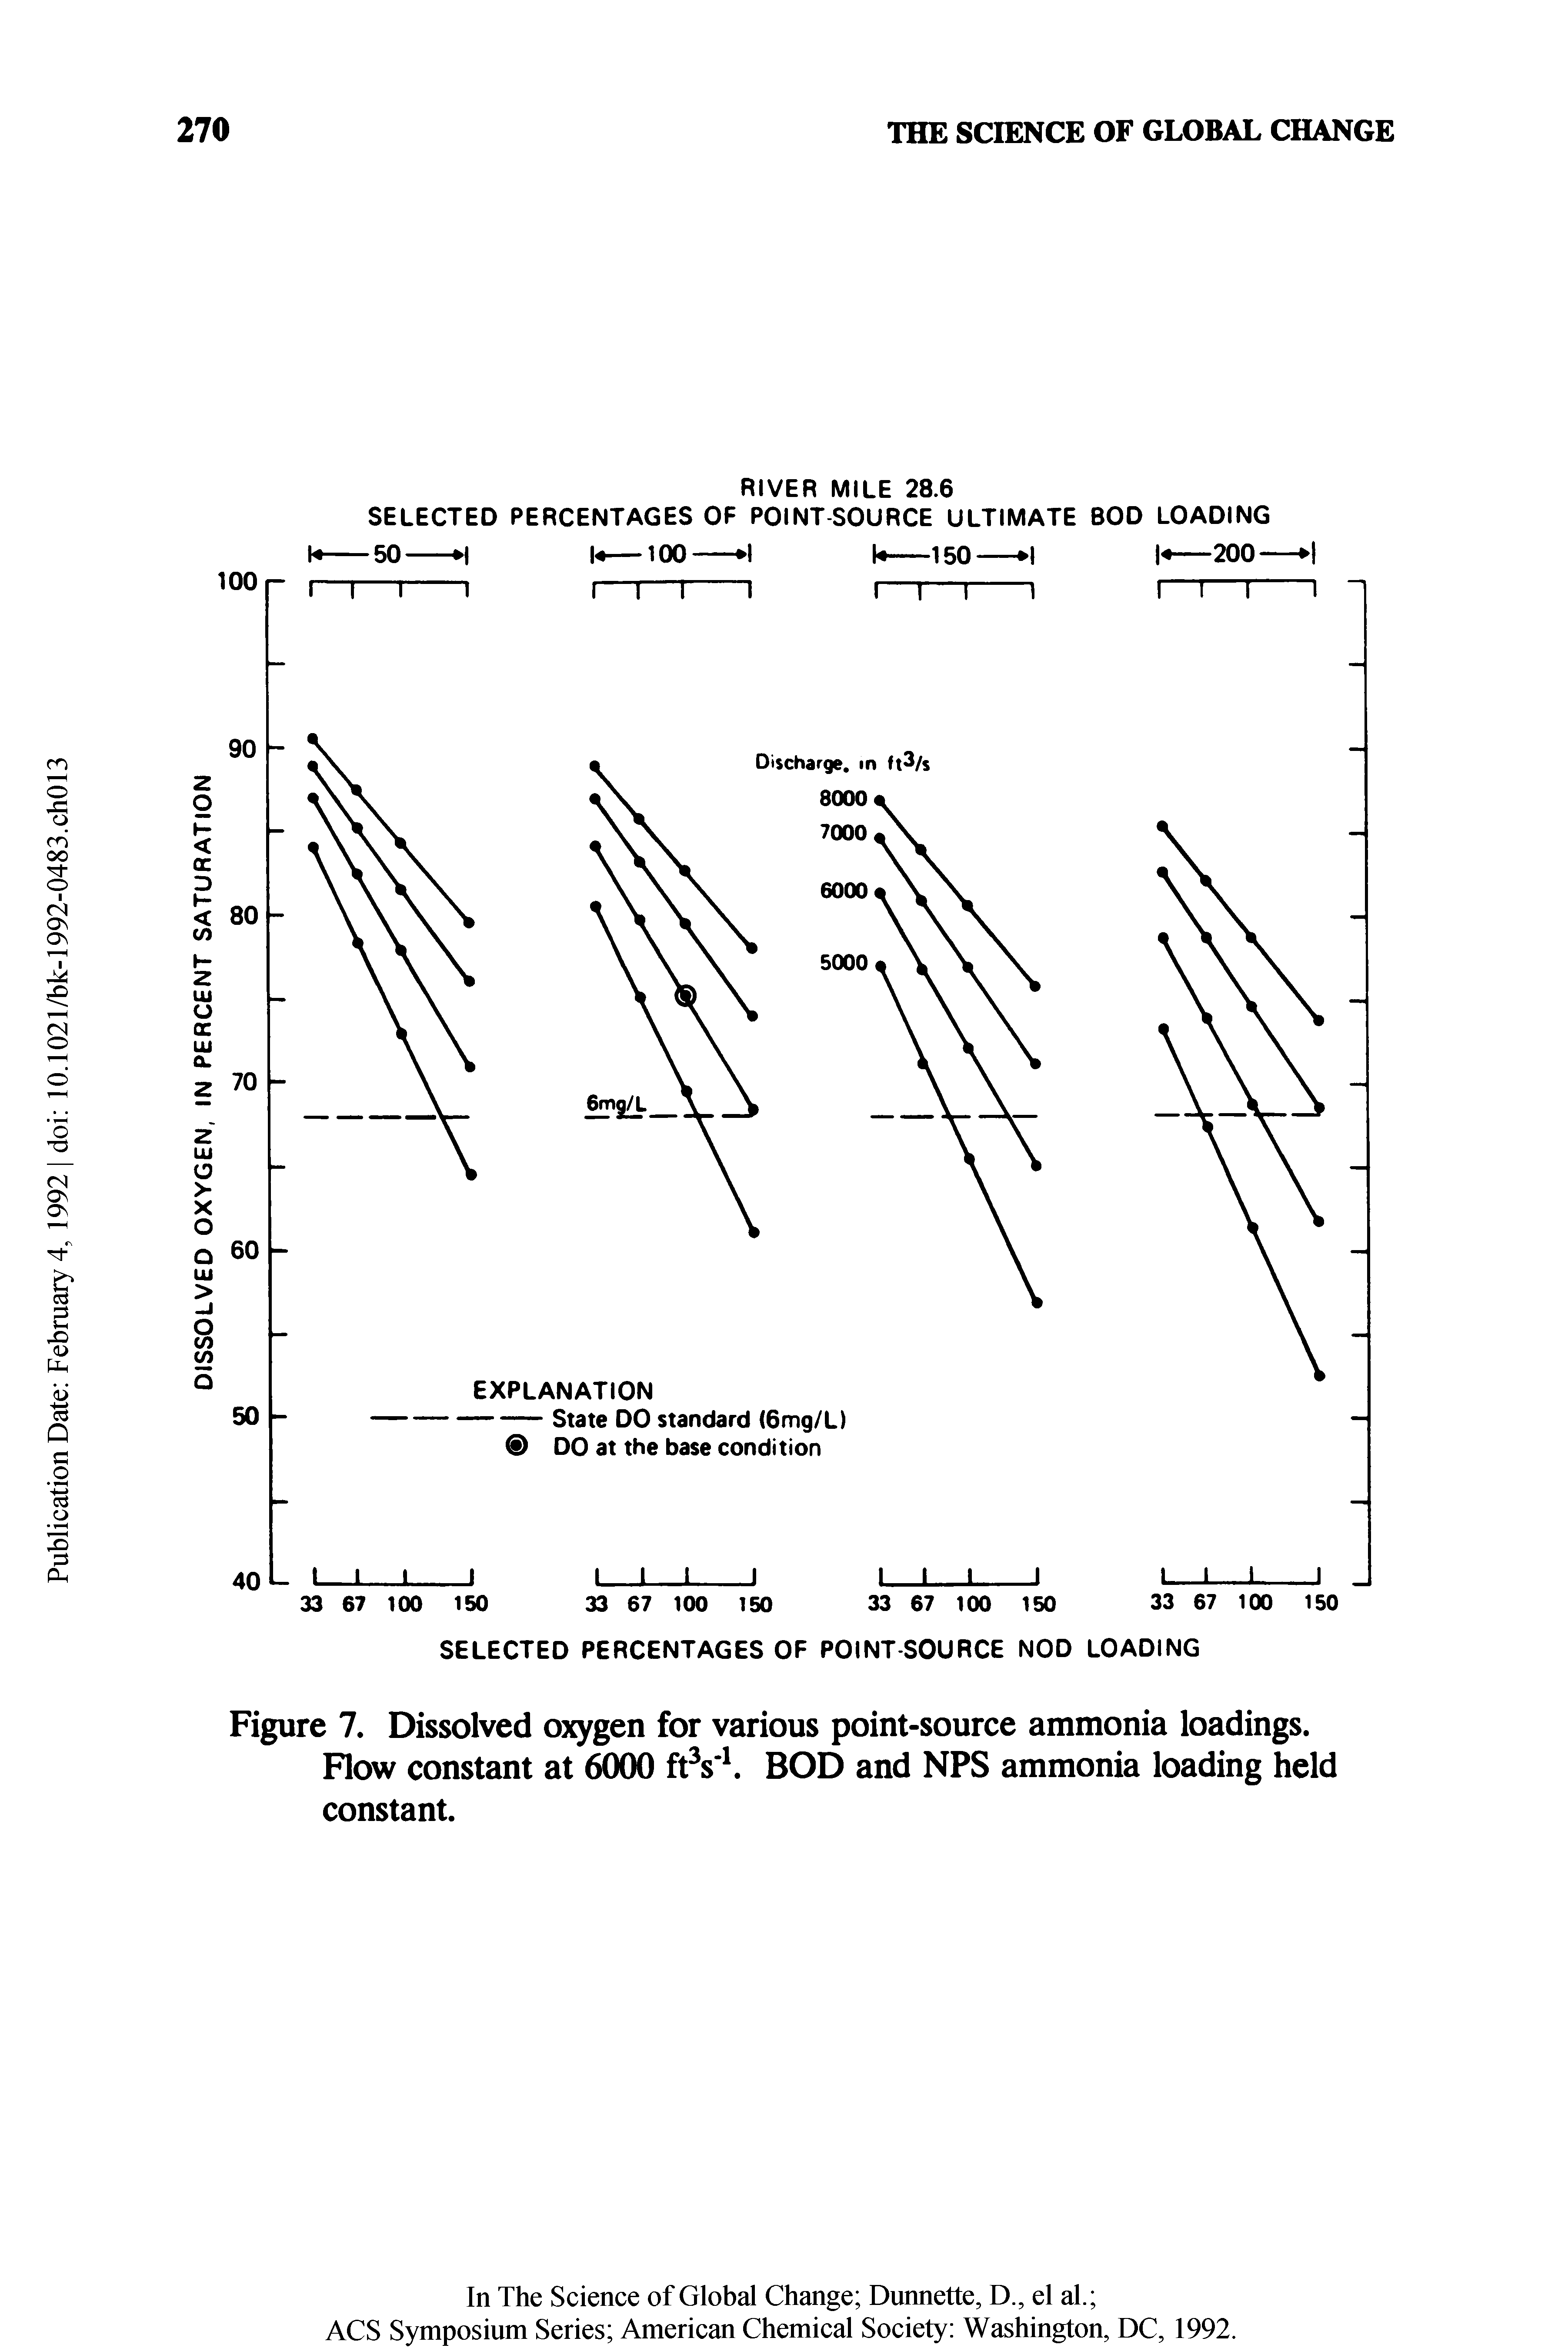 Figure 7. Dissolved oxygen for various point-source ammonia loadings. Flow constant at 6000 ft s BOD and NFS ammonia loading held constant.